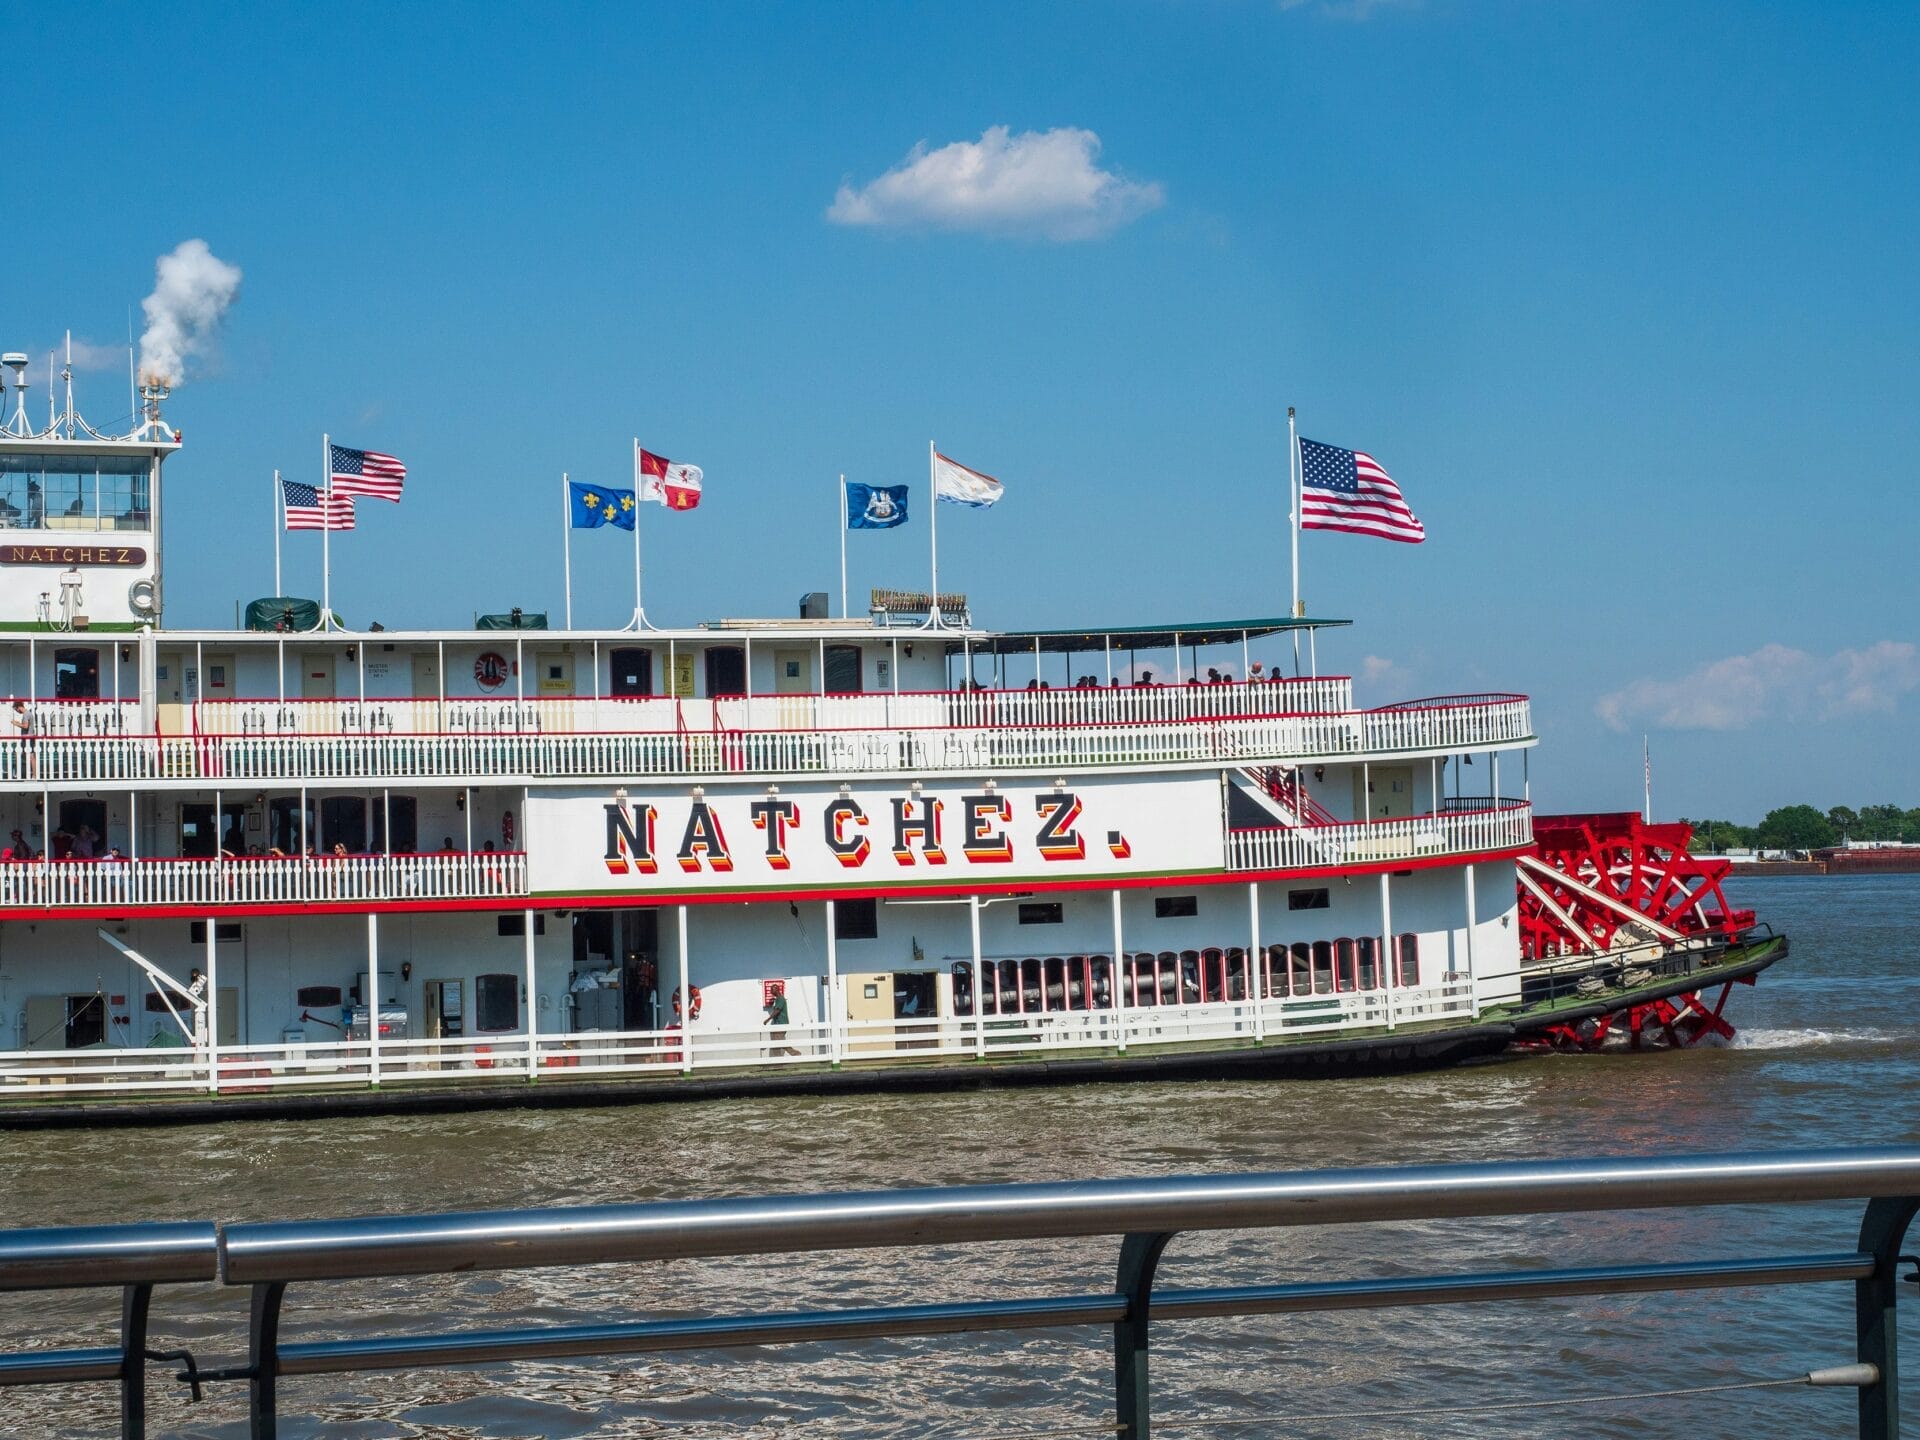 New Orleans river boat 